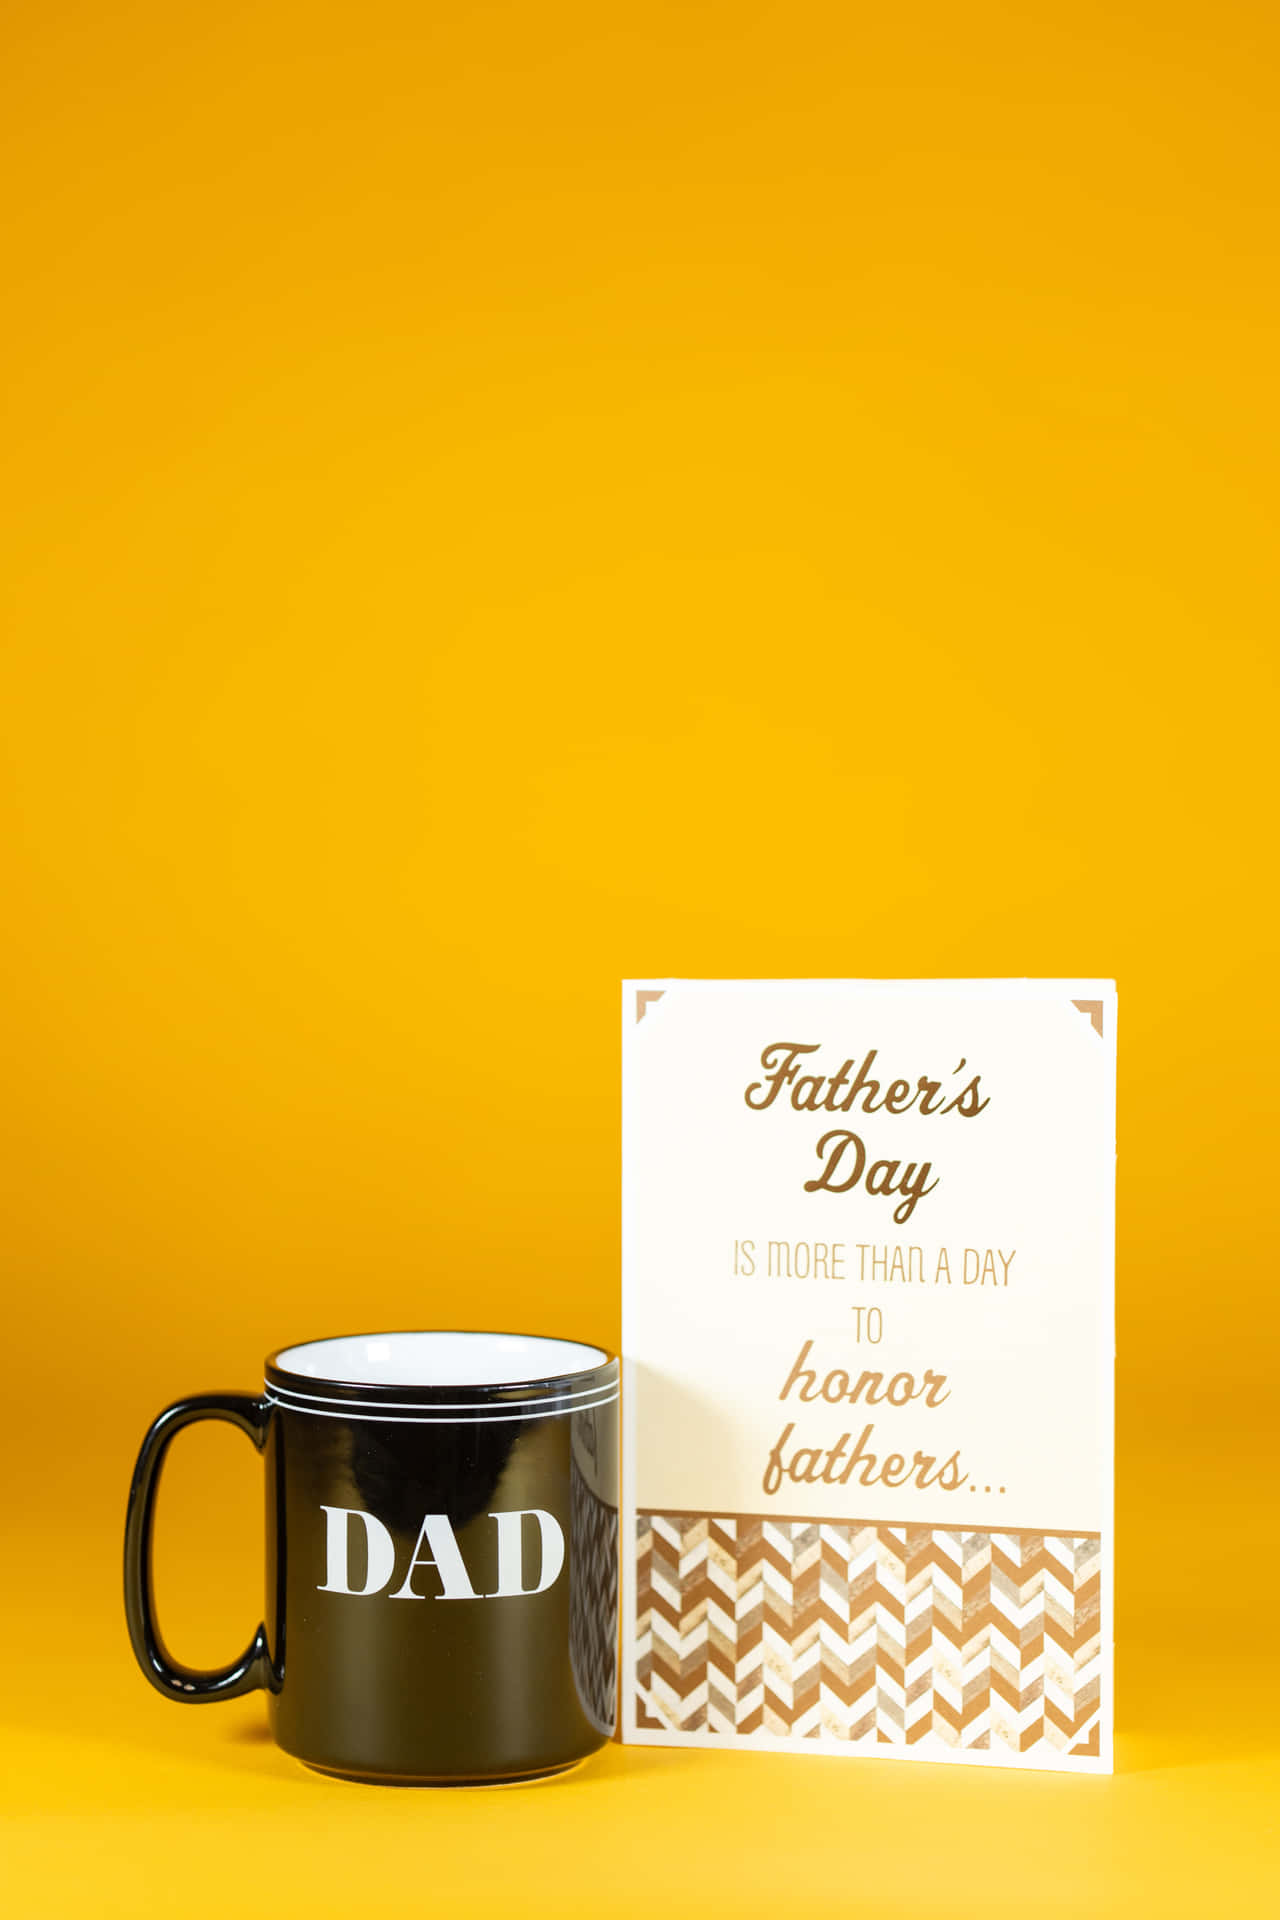 A Mug And Card With The Words Father's Day